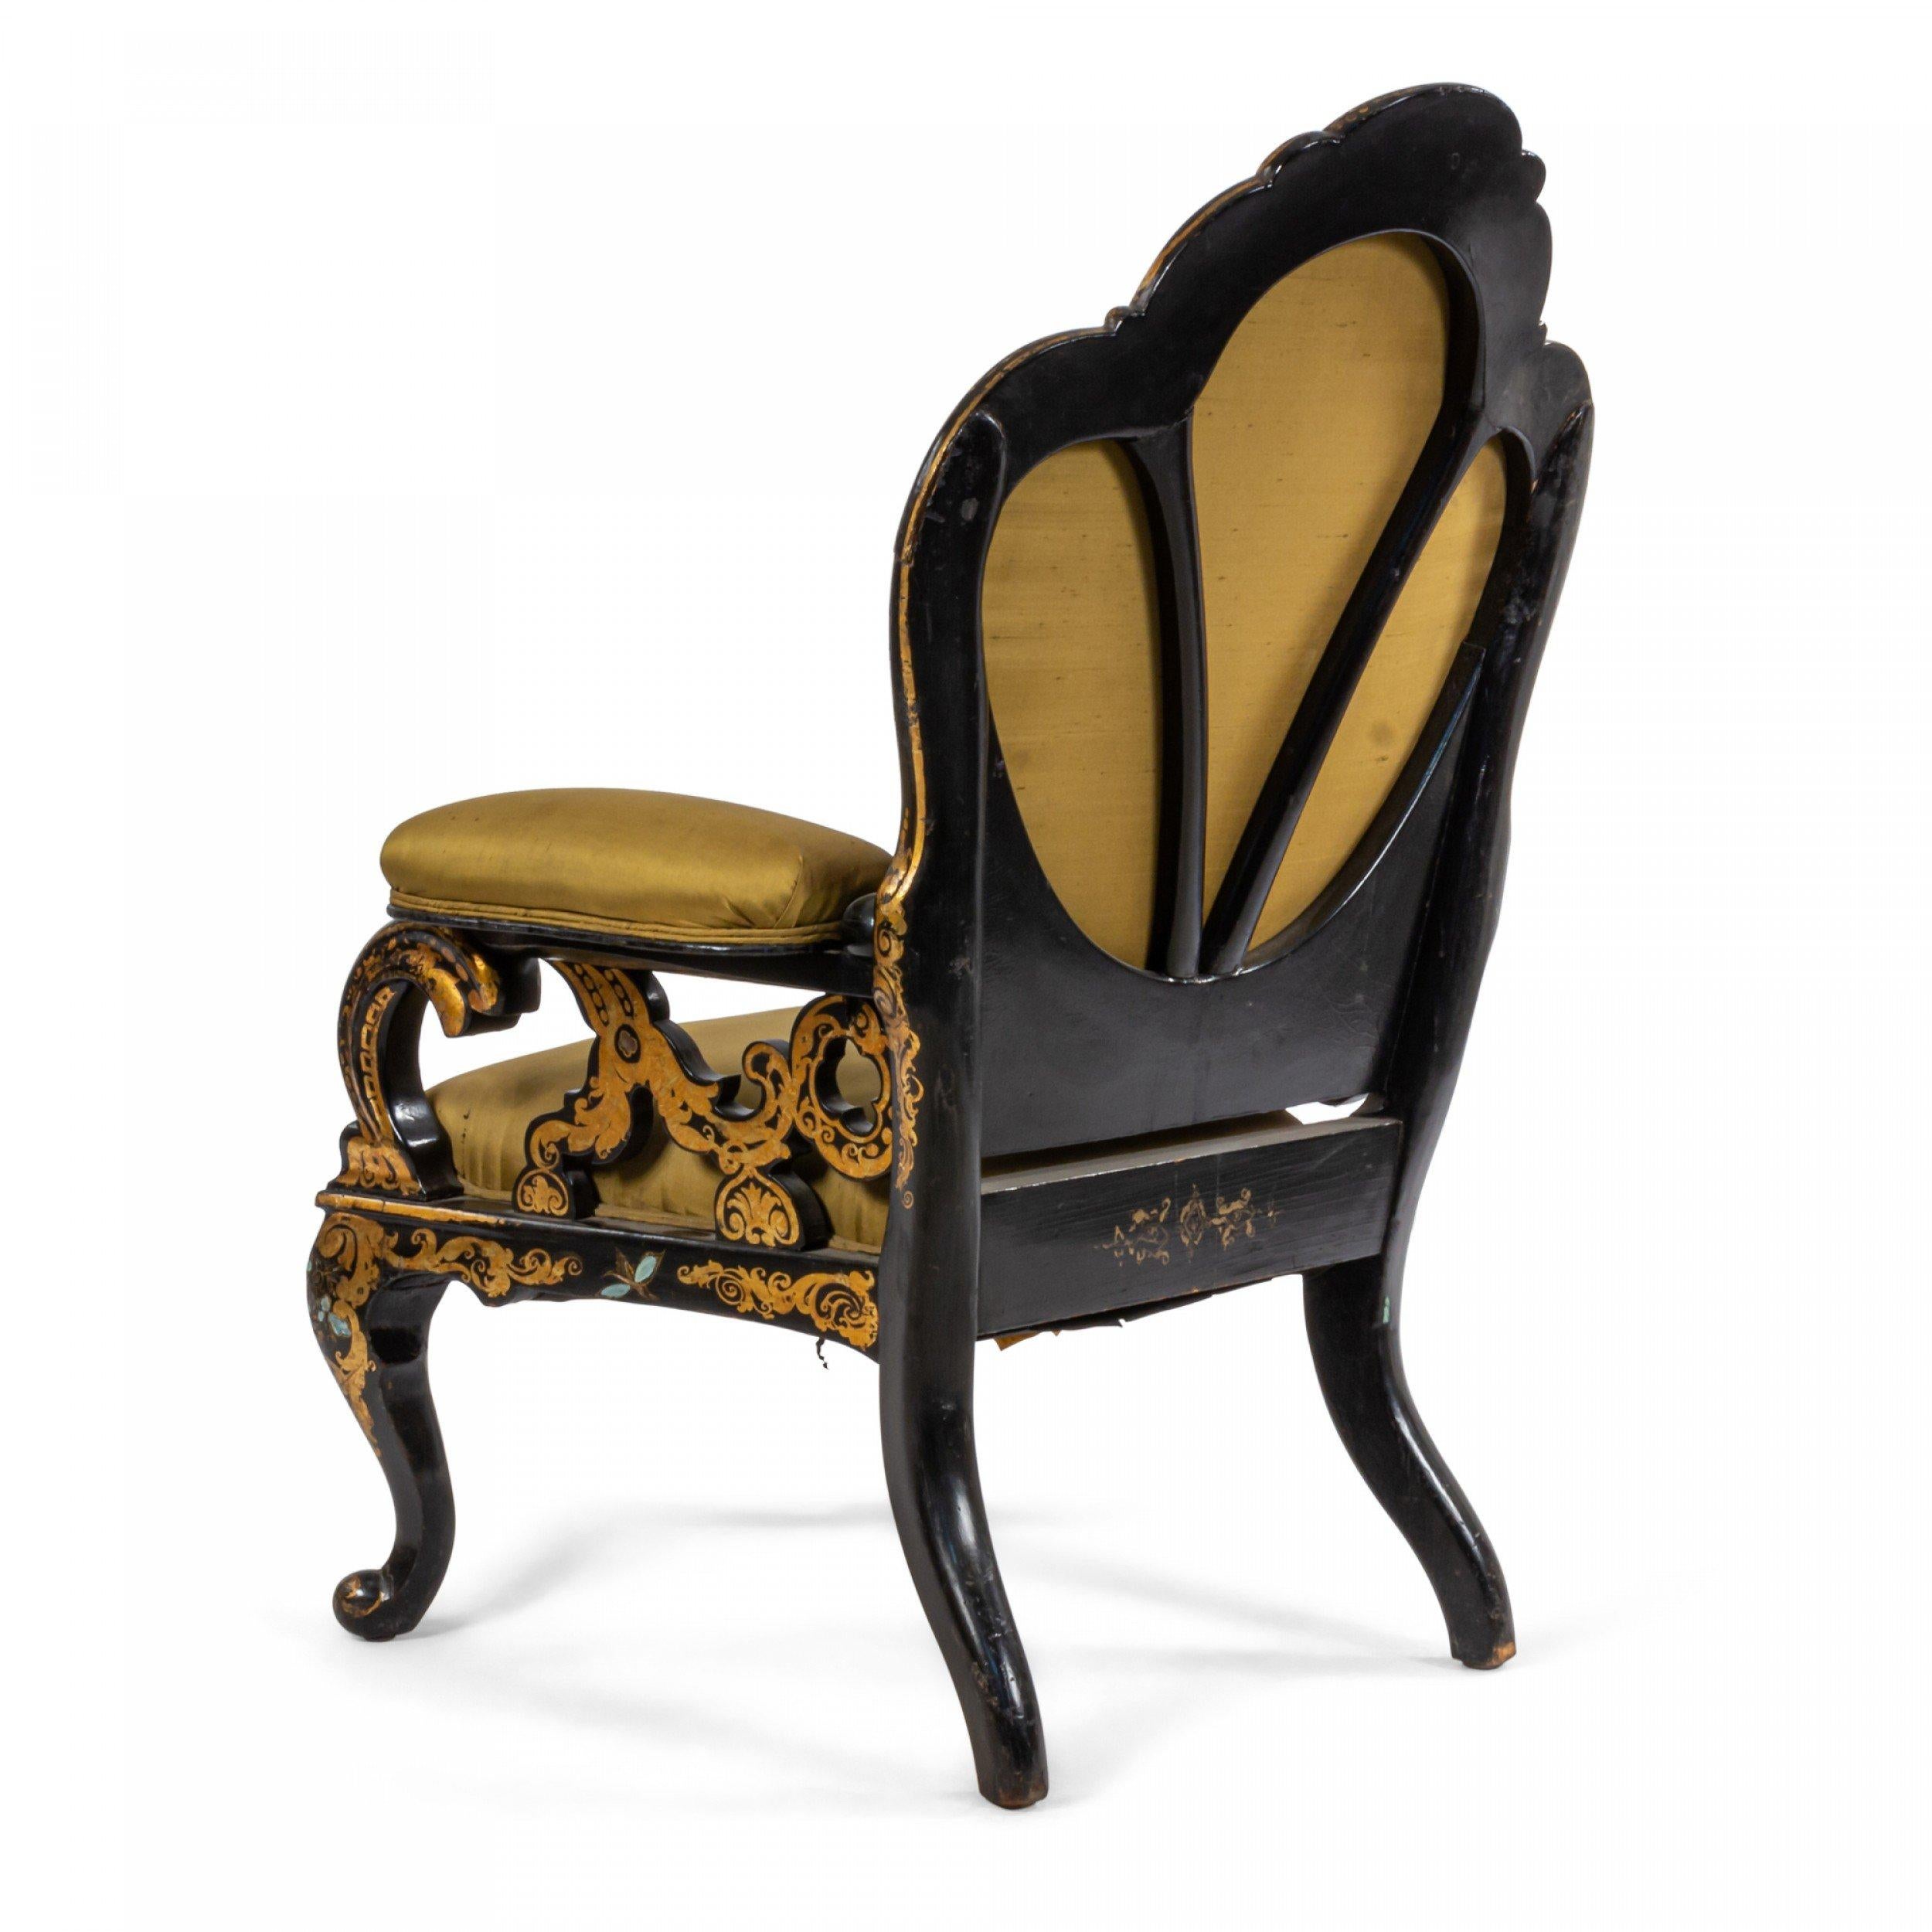 English Victorian black lacquered papier-mache armchair with pearl inlay, gold stenciled design, scalloped back, open work design arms, and green satin upholstery.
 